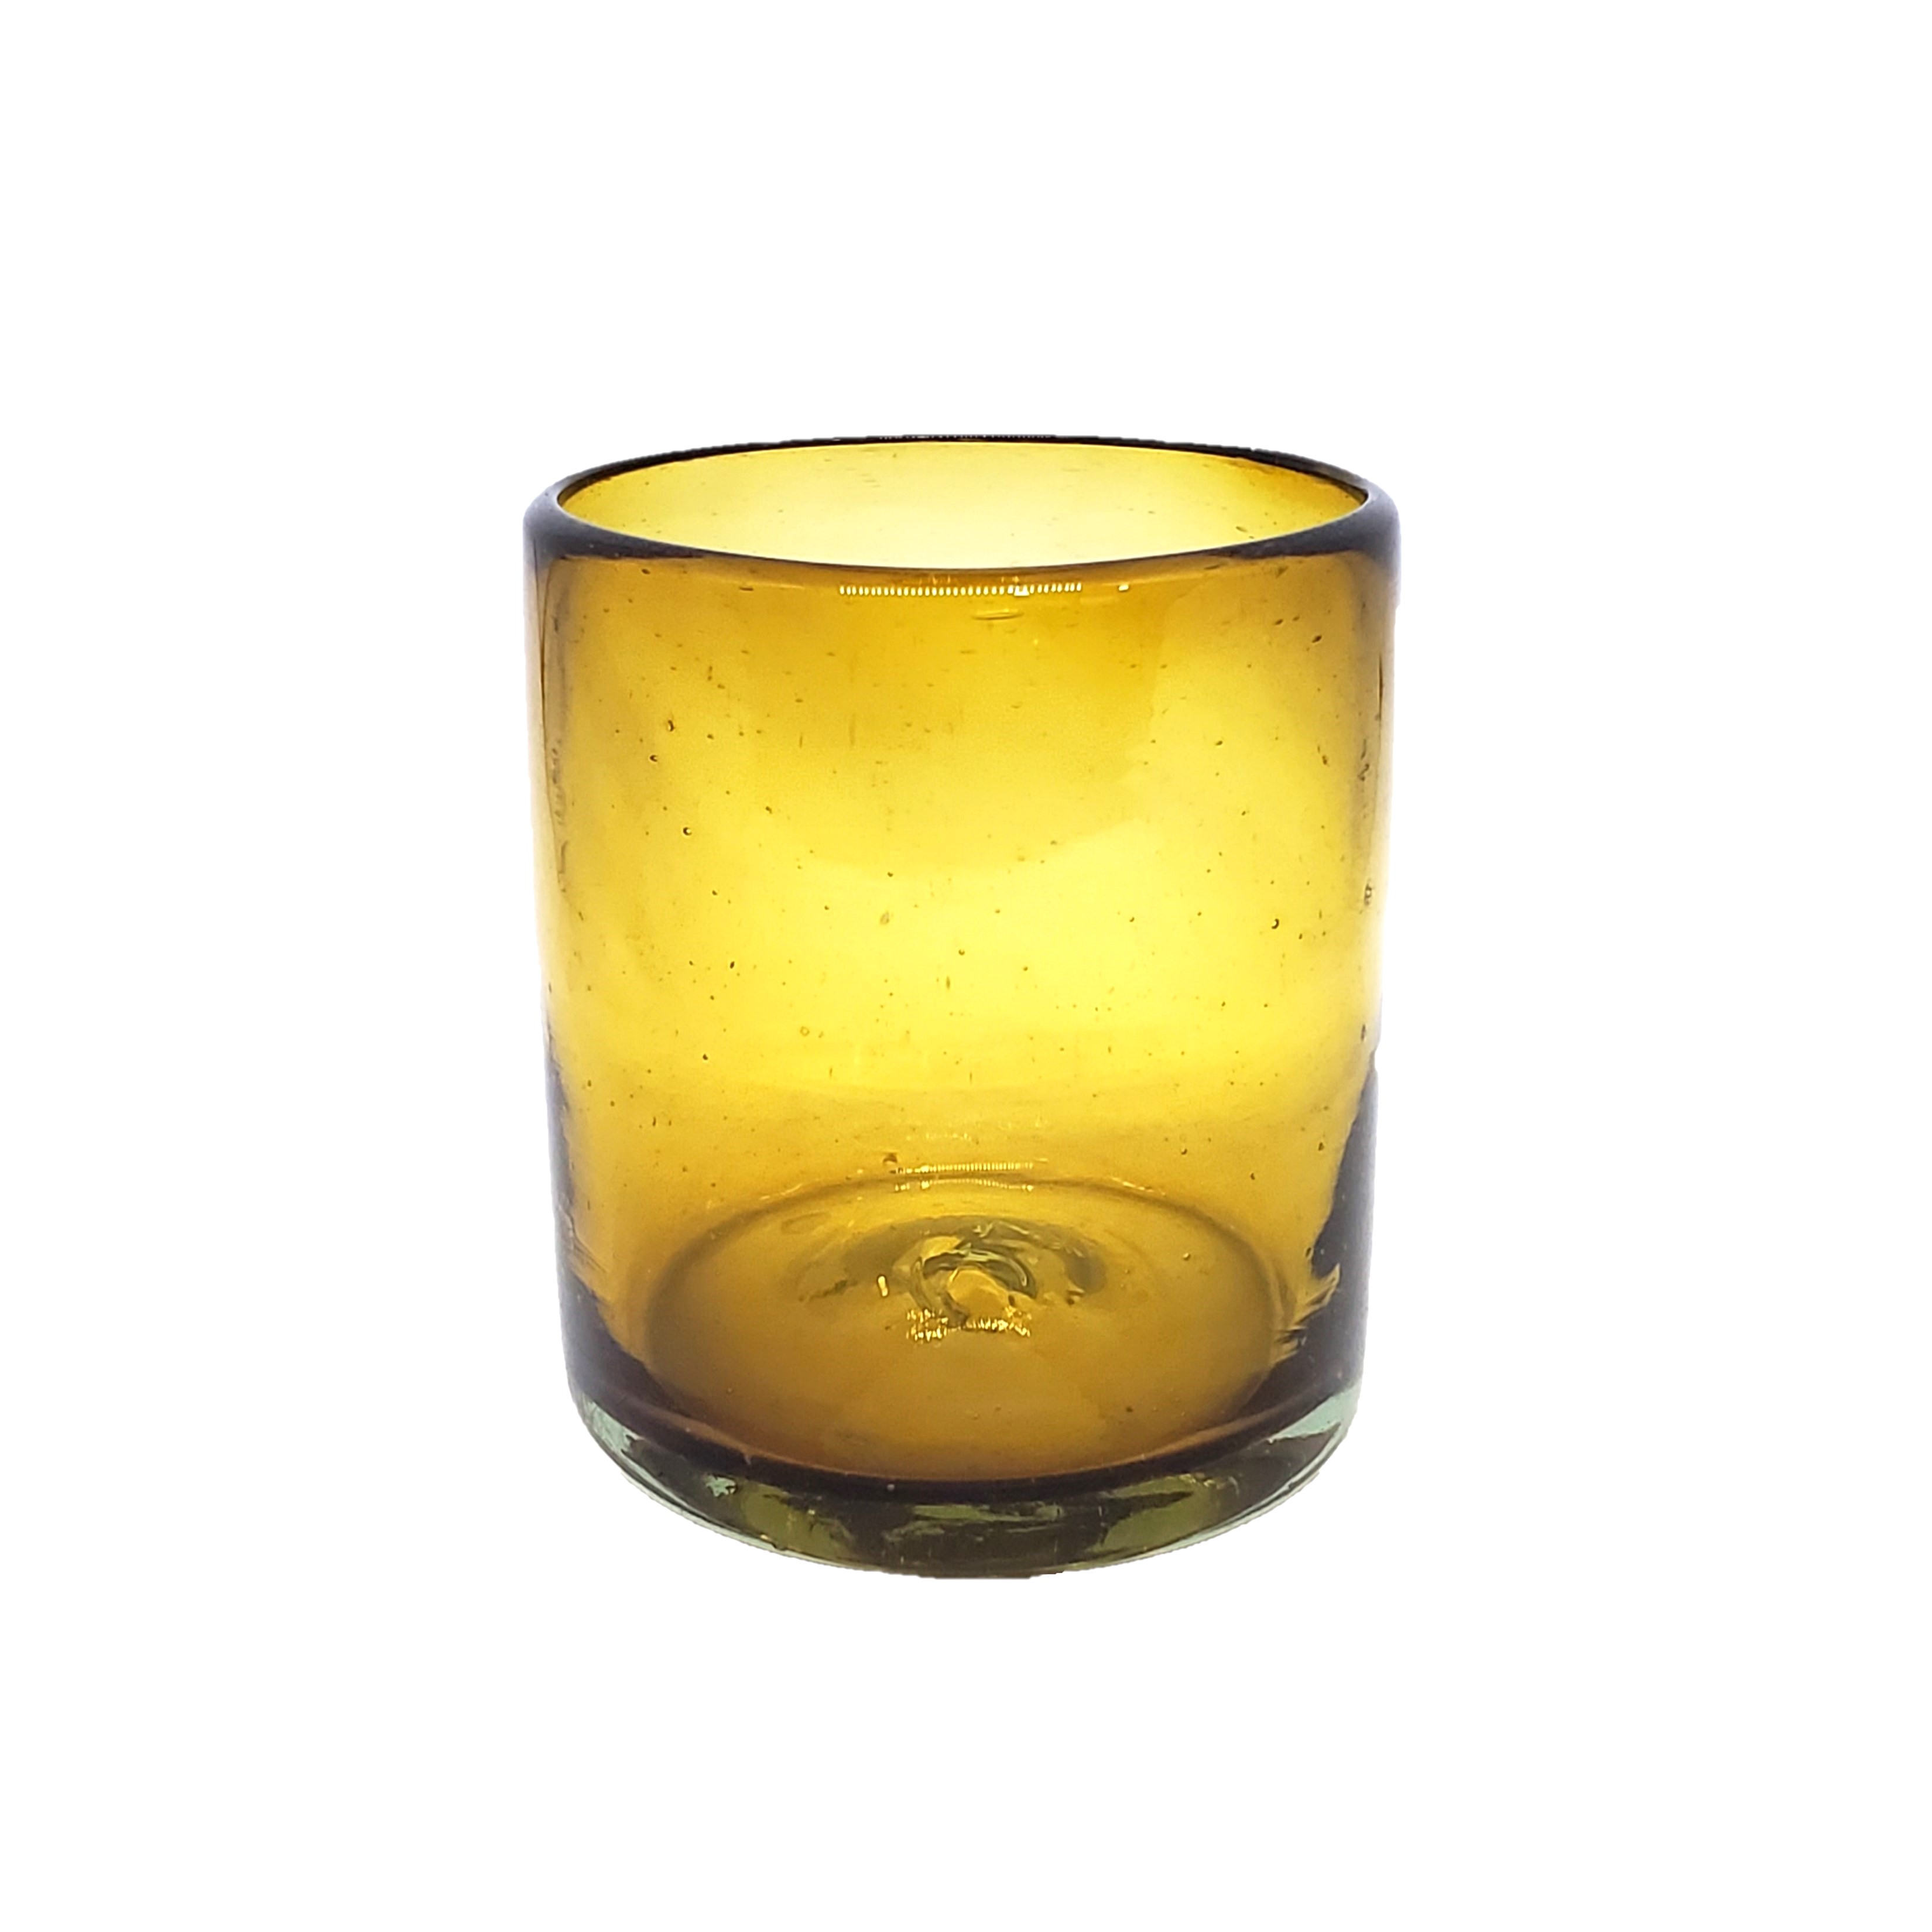 New Items / Solid Amber 9 oz Short Tumblers (set of 6) / Enhance your favorite drink with these colorful handcrafted glasses.